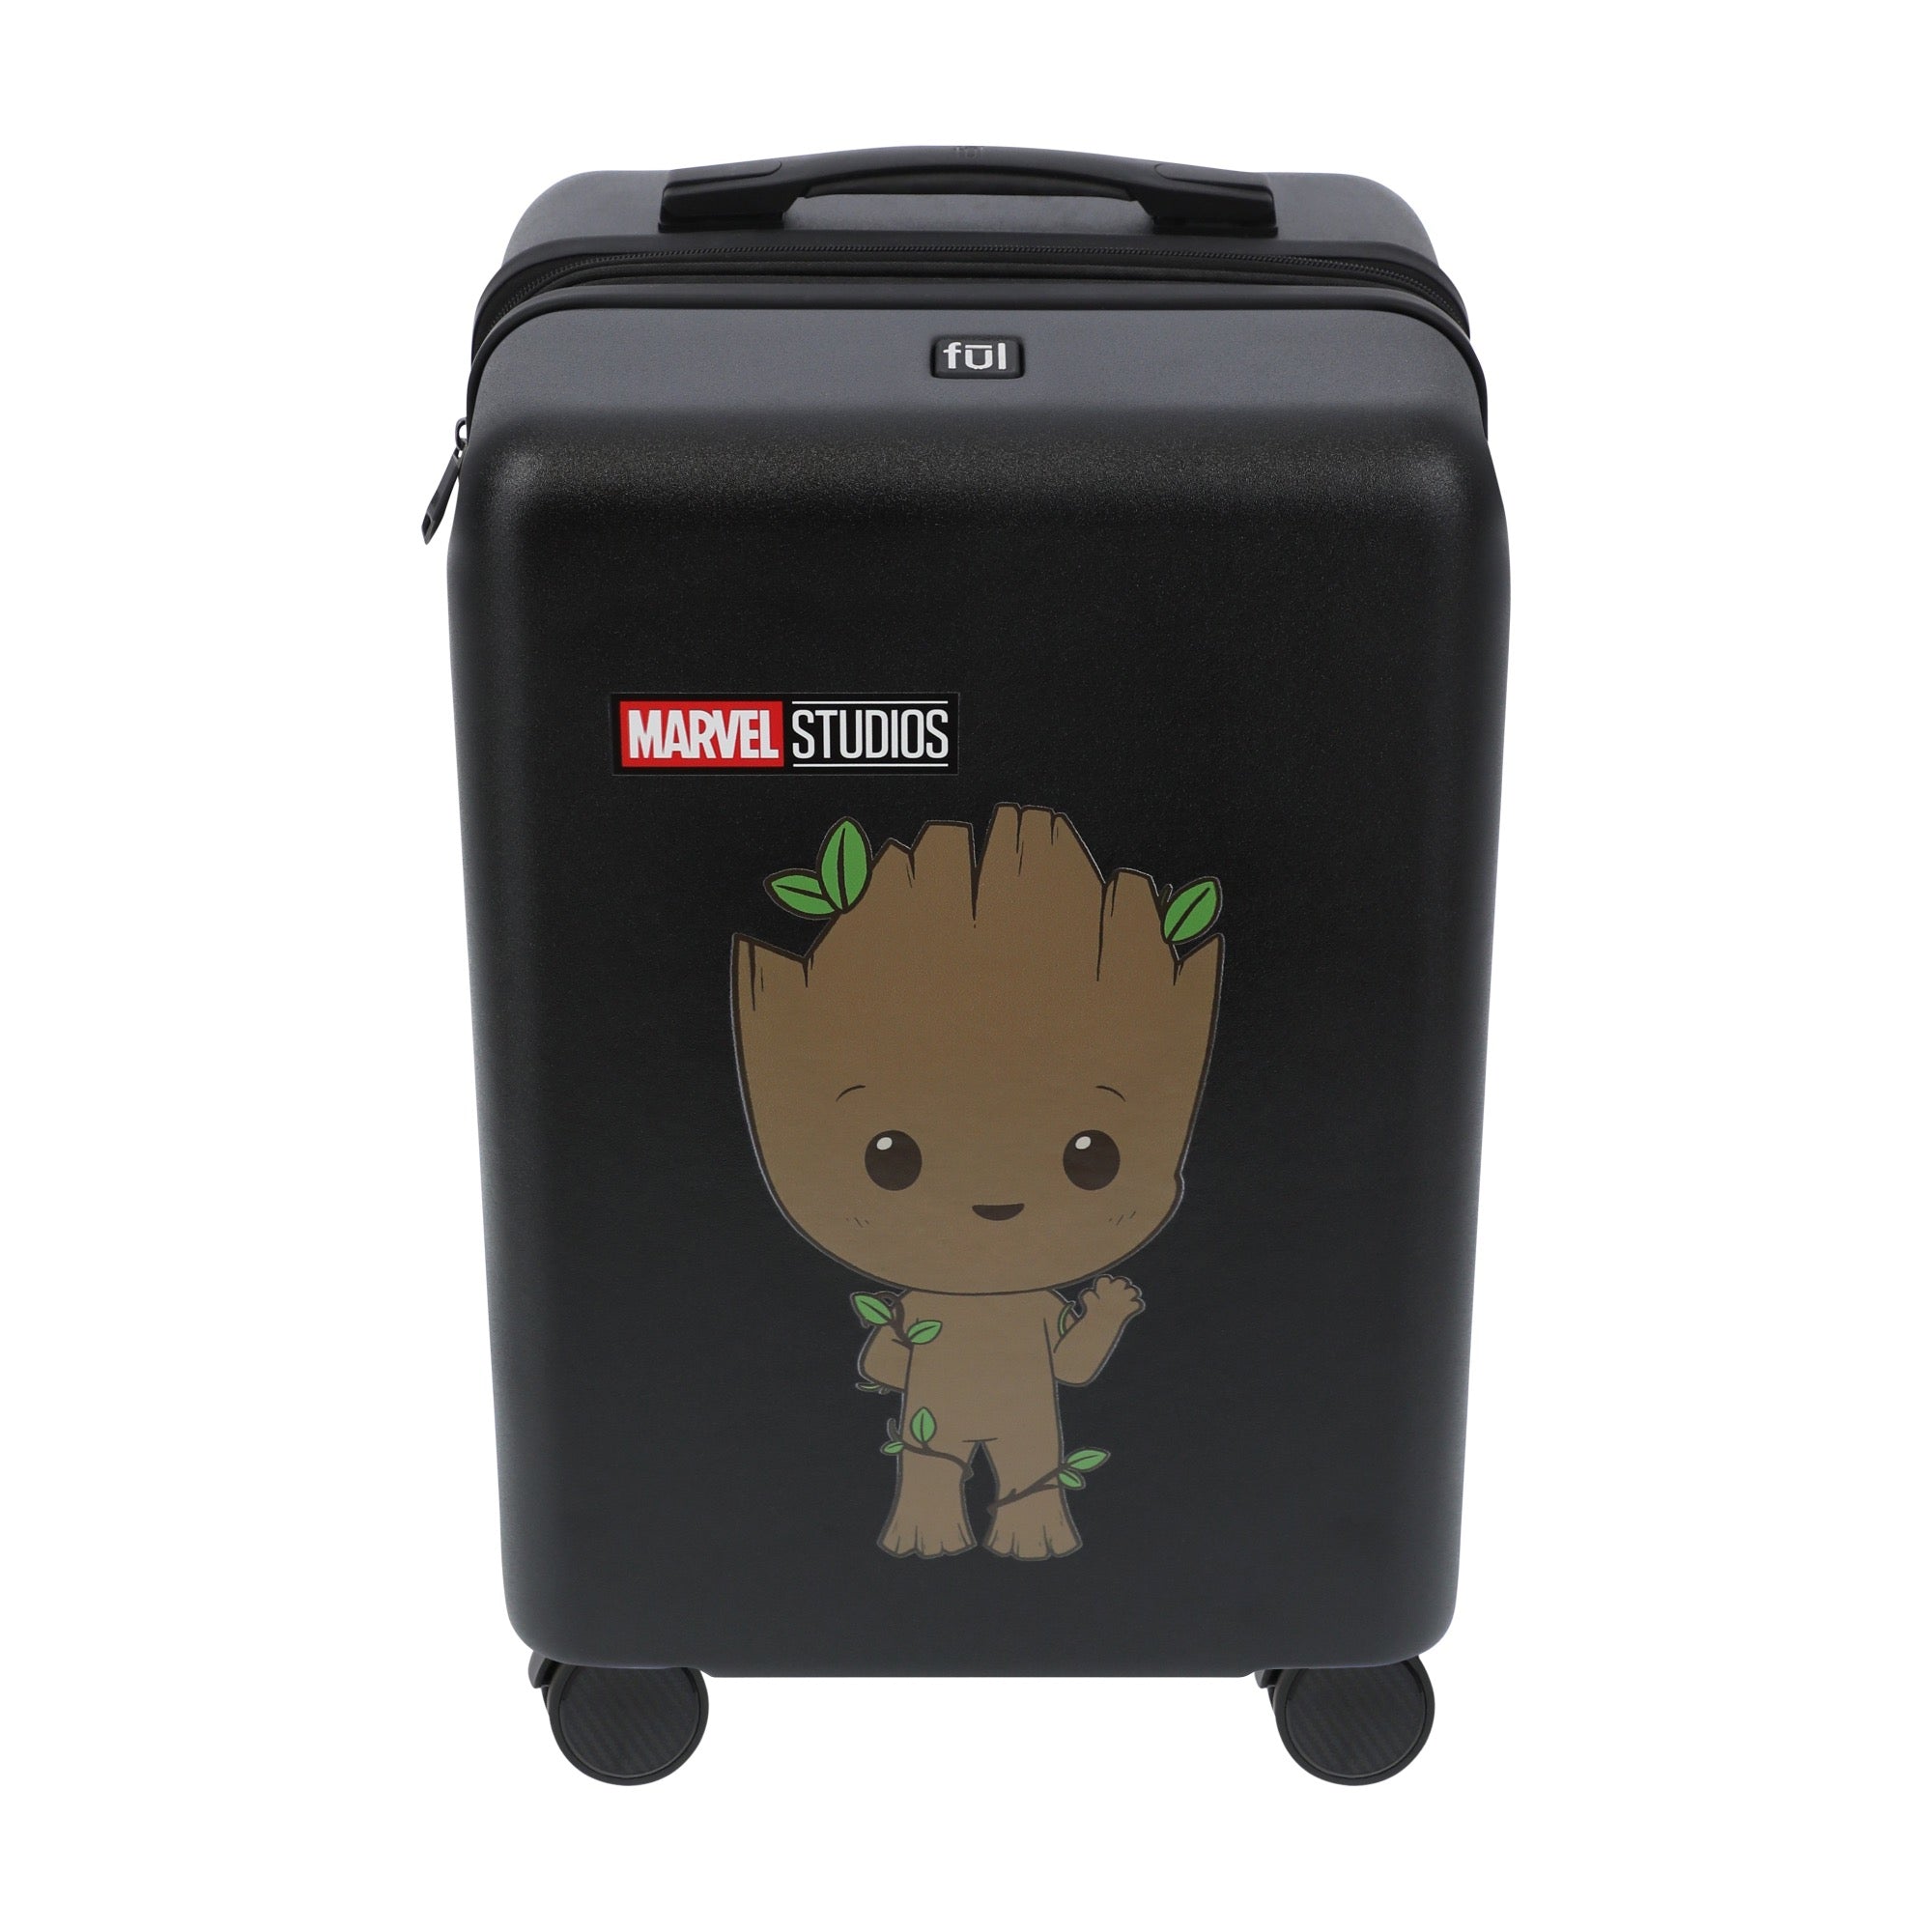 Black marvel baby groot 22.5" carry-on spinner suitcase luggage by Ful